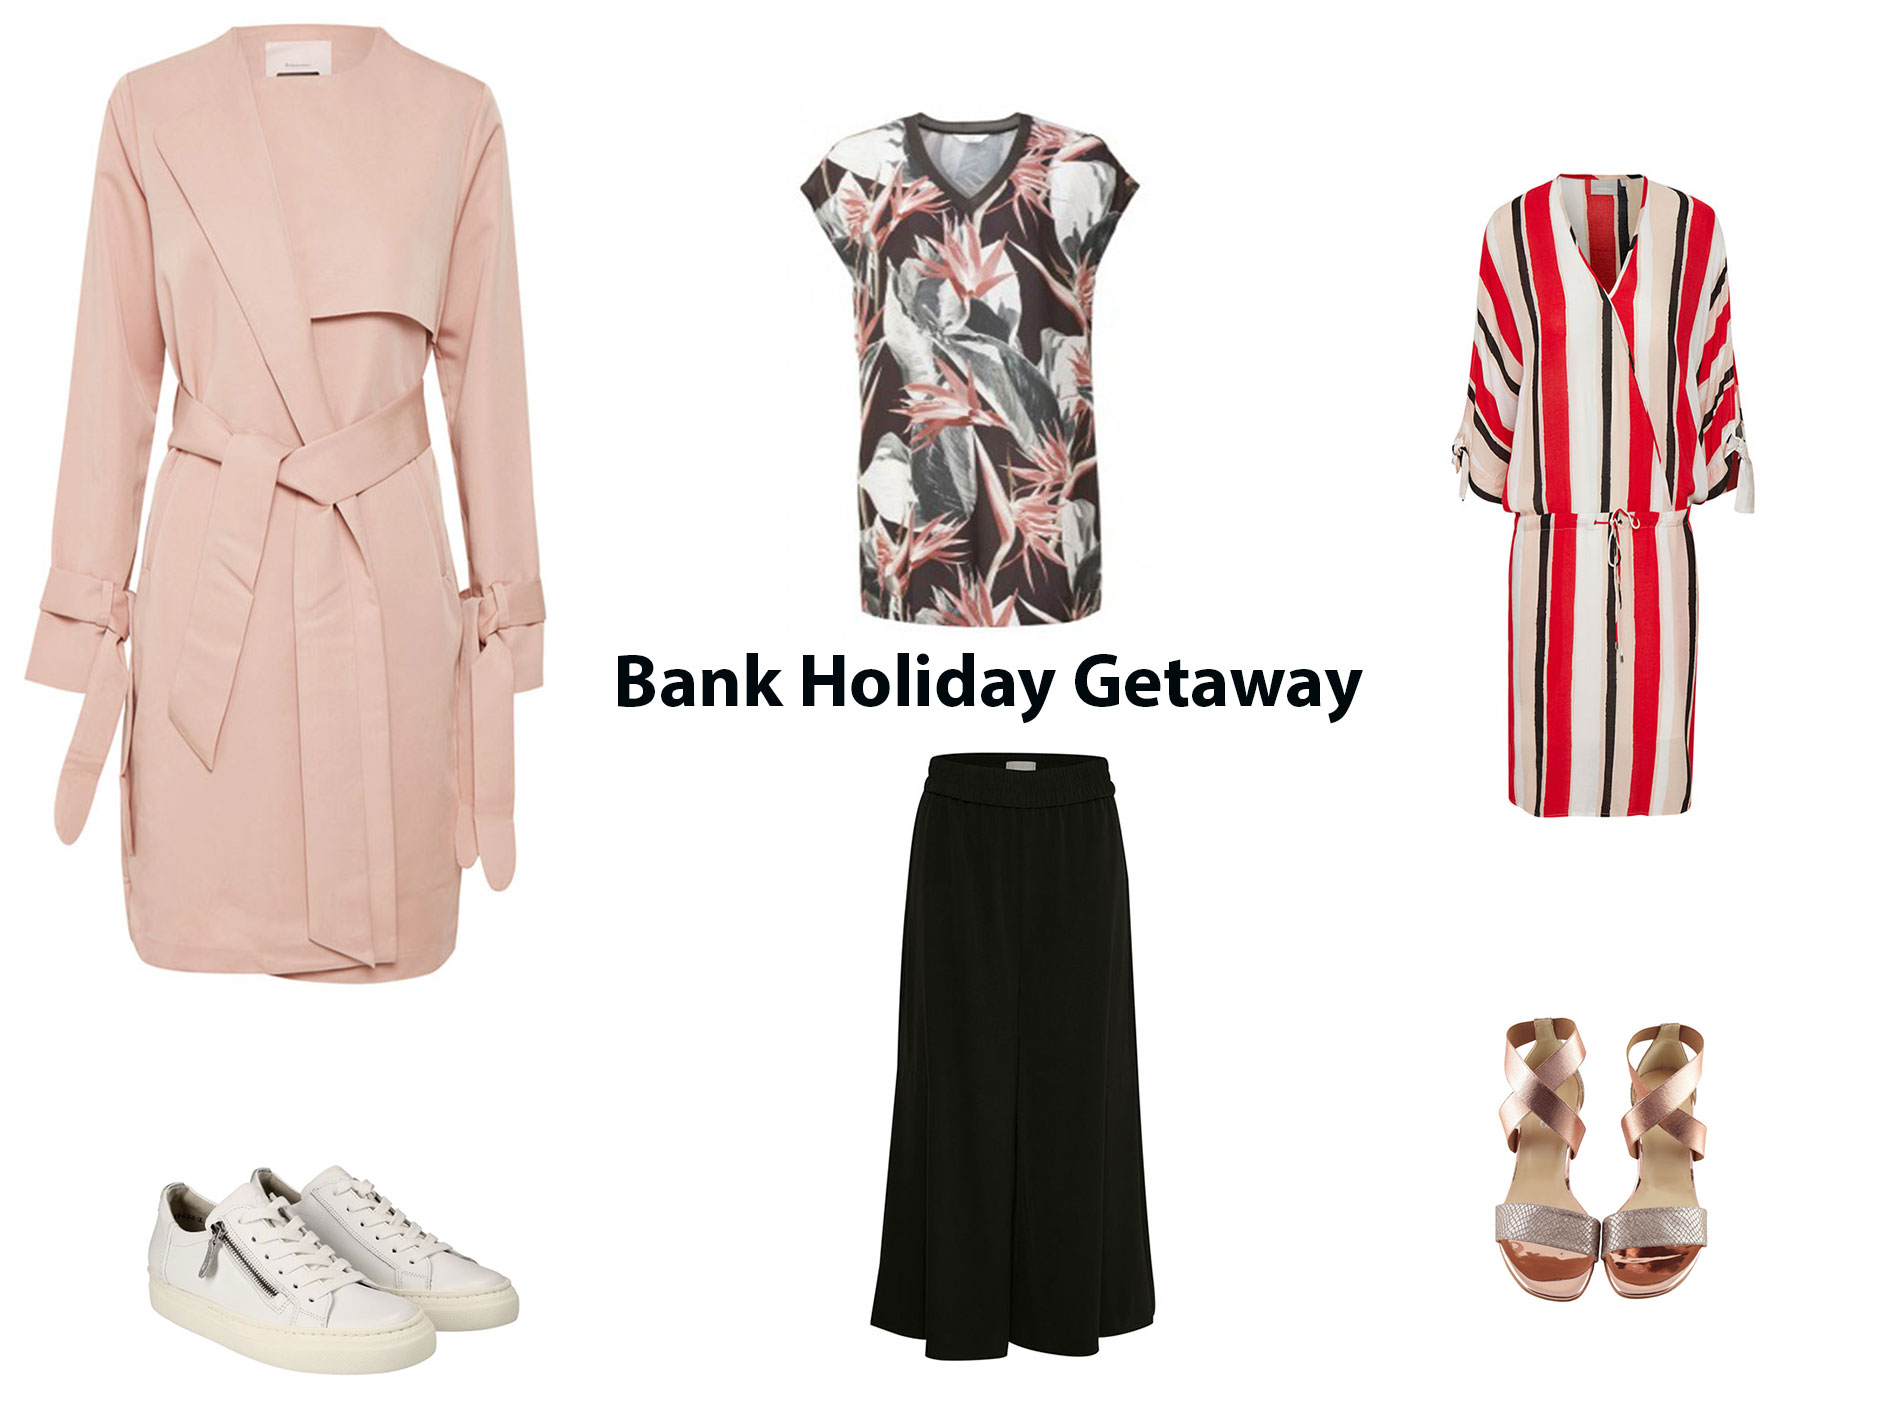 Get packing for your Bank Holiday Getaway